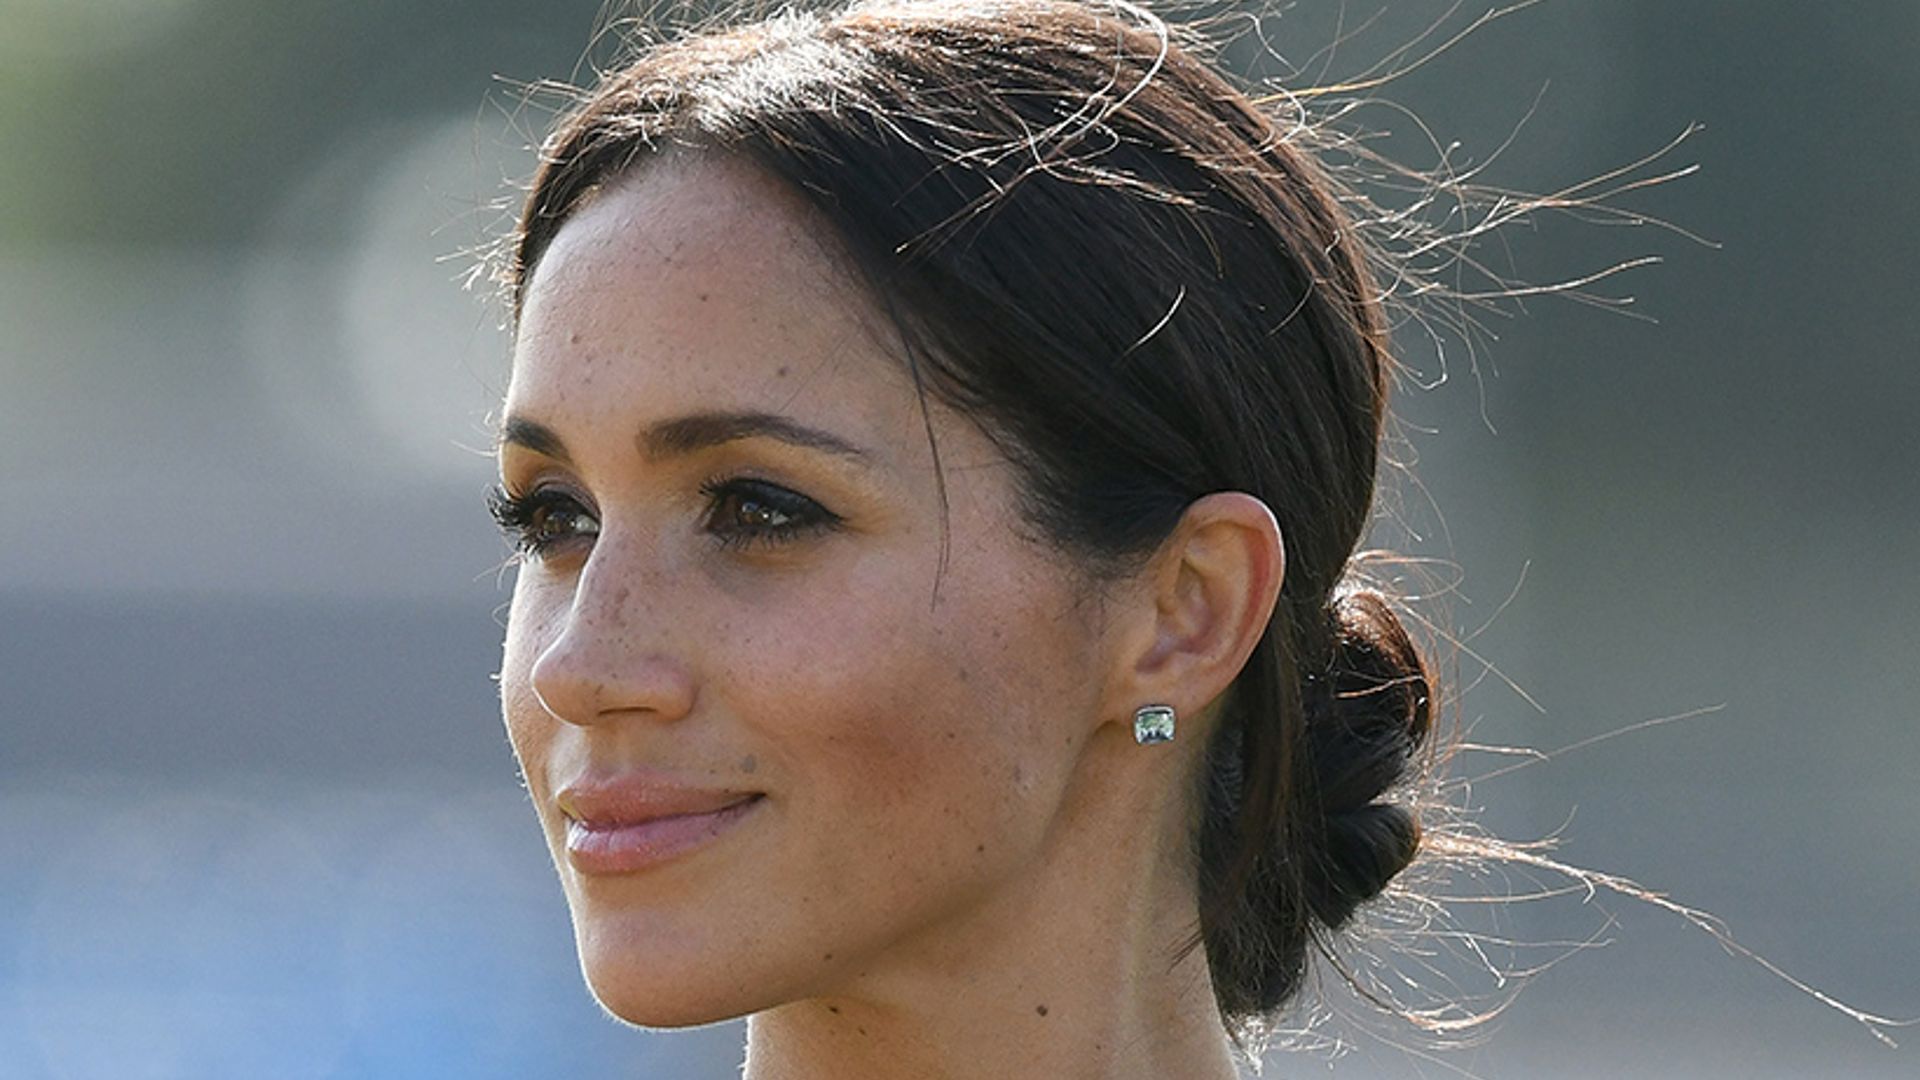 Duchess Meghan's makeup artist has revealed his top 4 skincare products